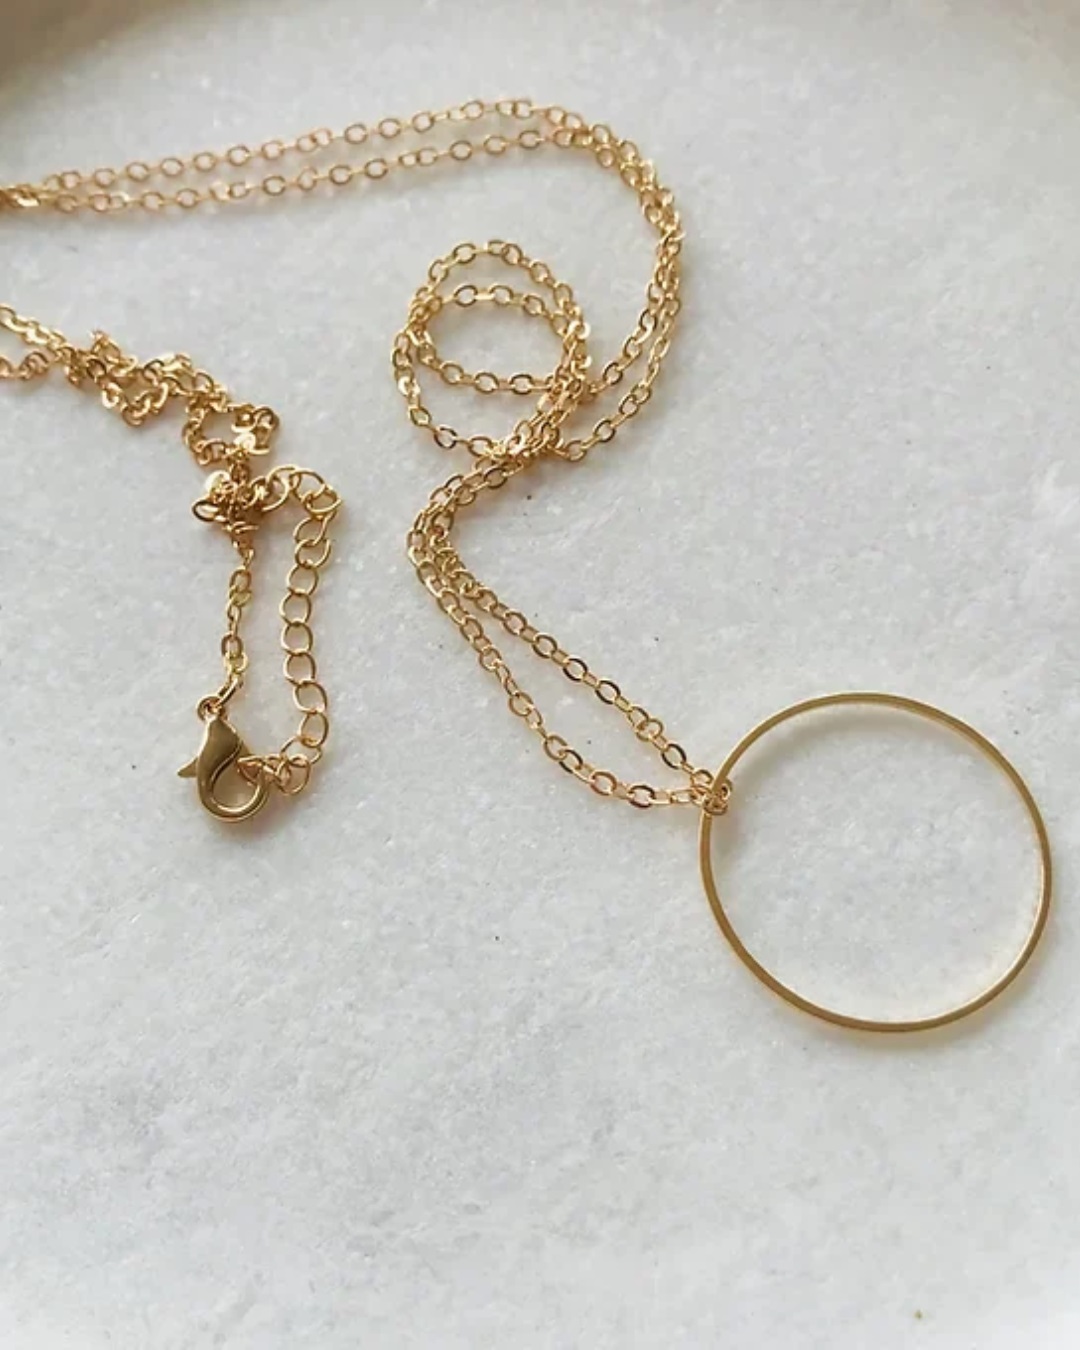 Gold circle necklaces on chain